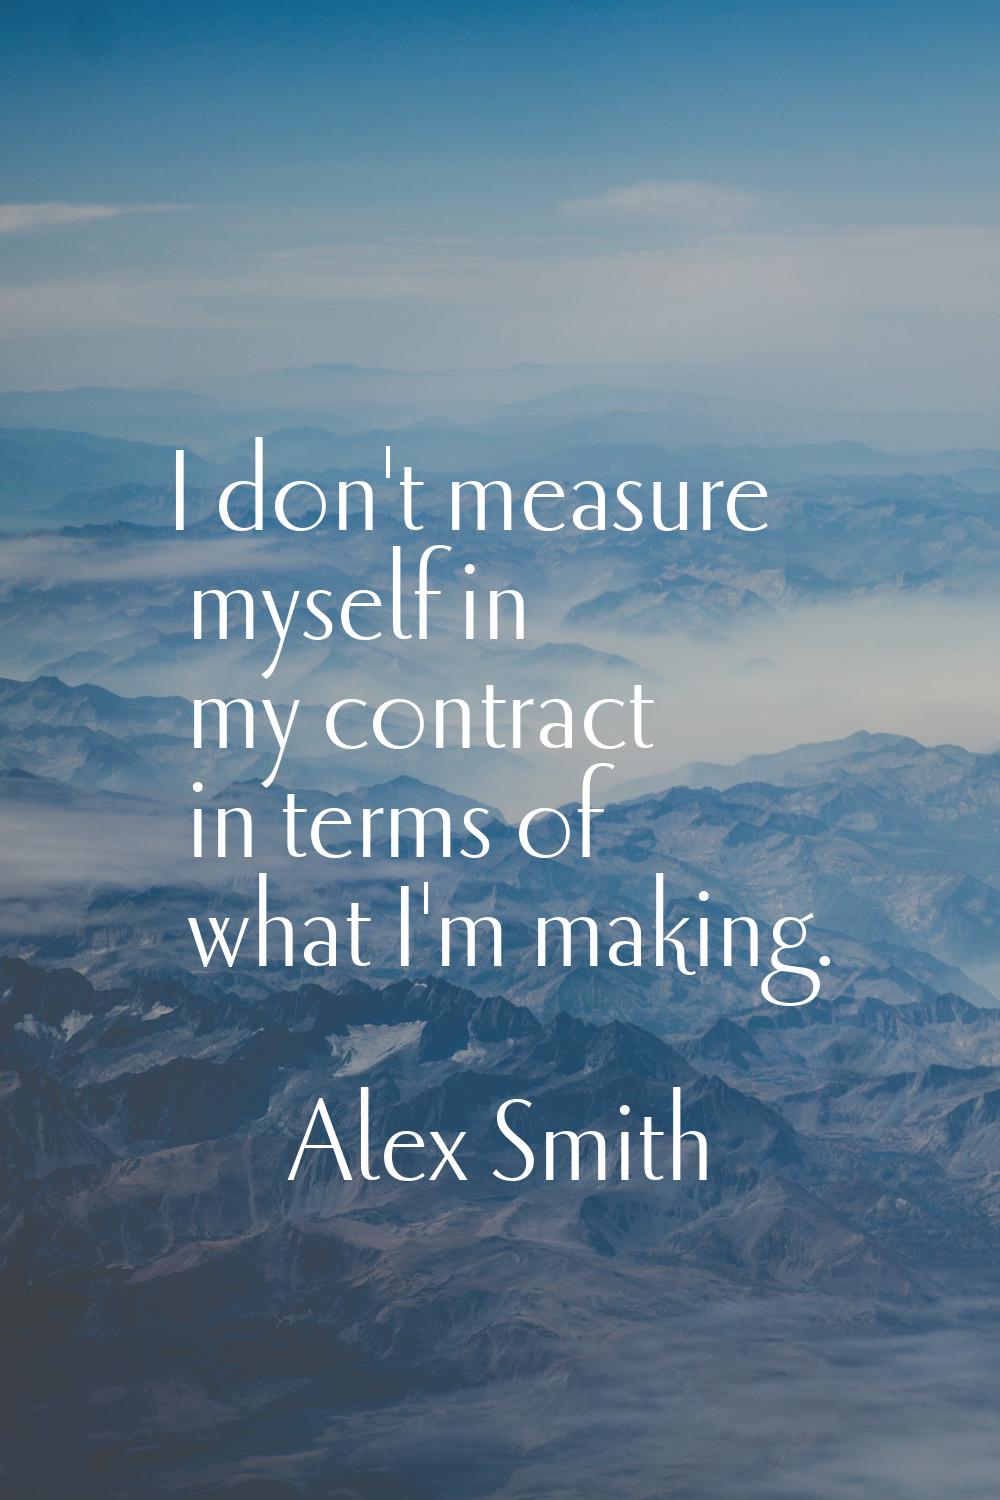 I don't measure myself in my contract in terms of what I'm making.